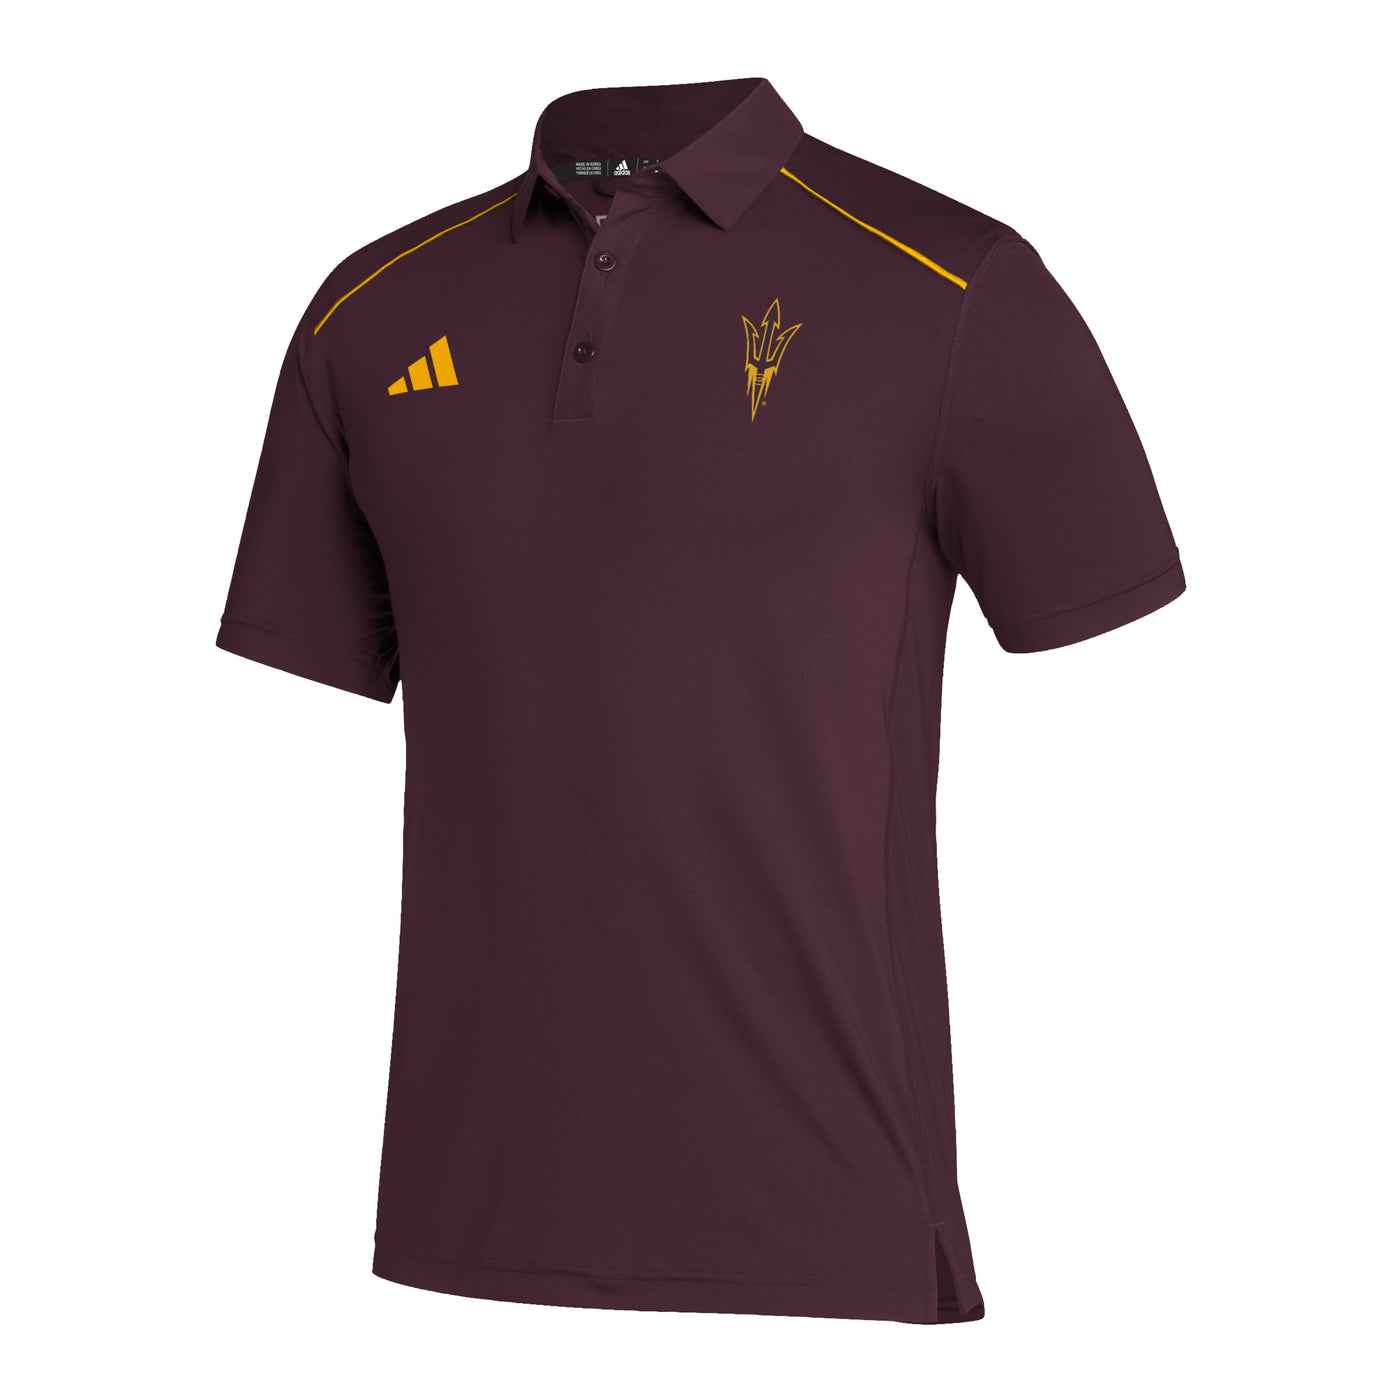 ASU maroon adidas polo with gold trim accents on the shoulders. on the left side of the chest is a gold adidas logo. On the right side of the chest is a gold outline of the pitchfork logo. 